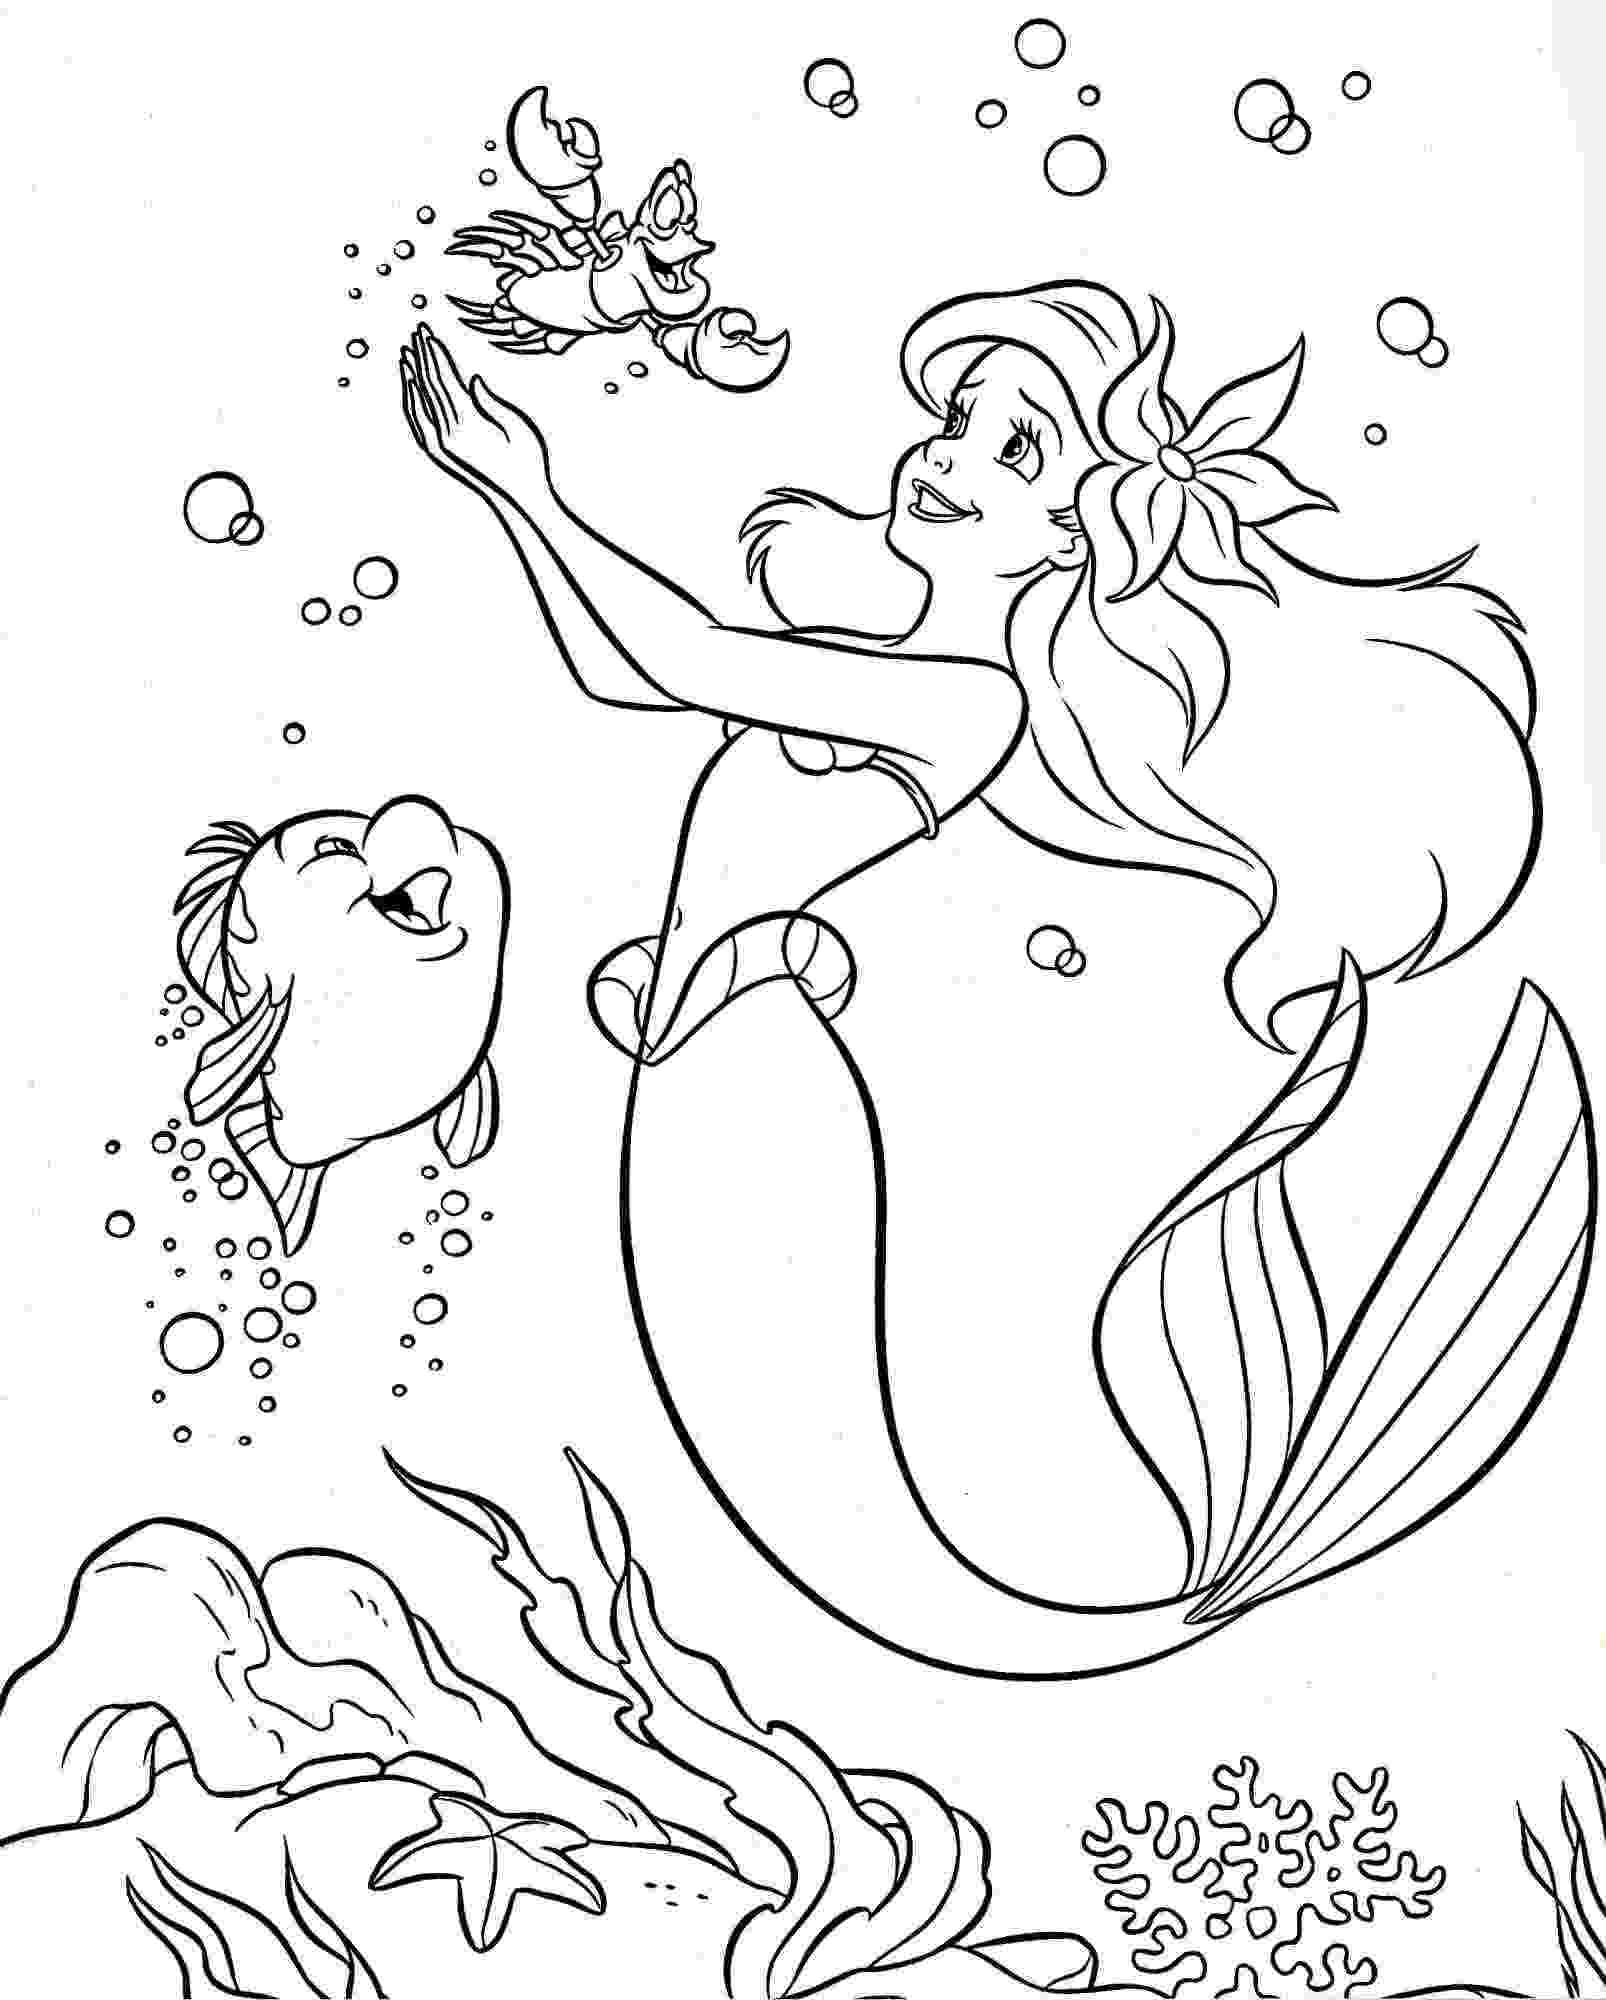 disney little mermaid coloring pages colouring pages coloring pages disney princess little mermaid pages coloring little disney 